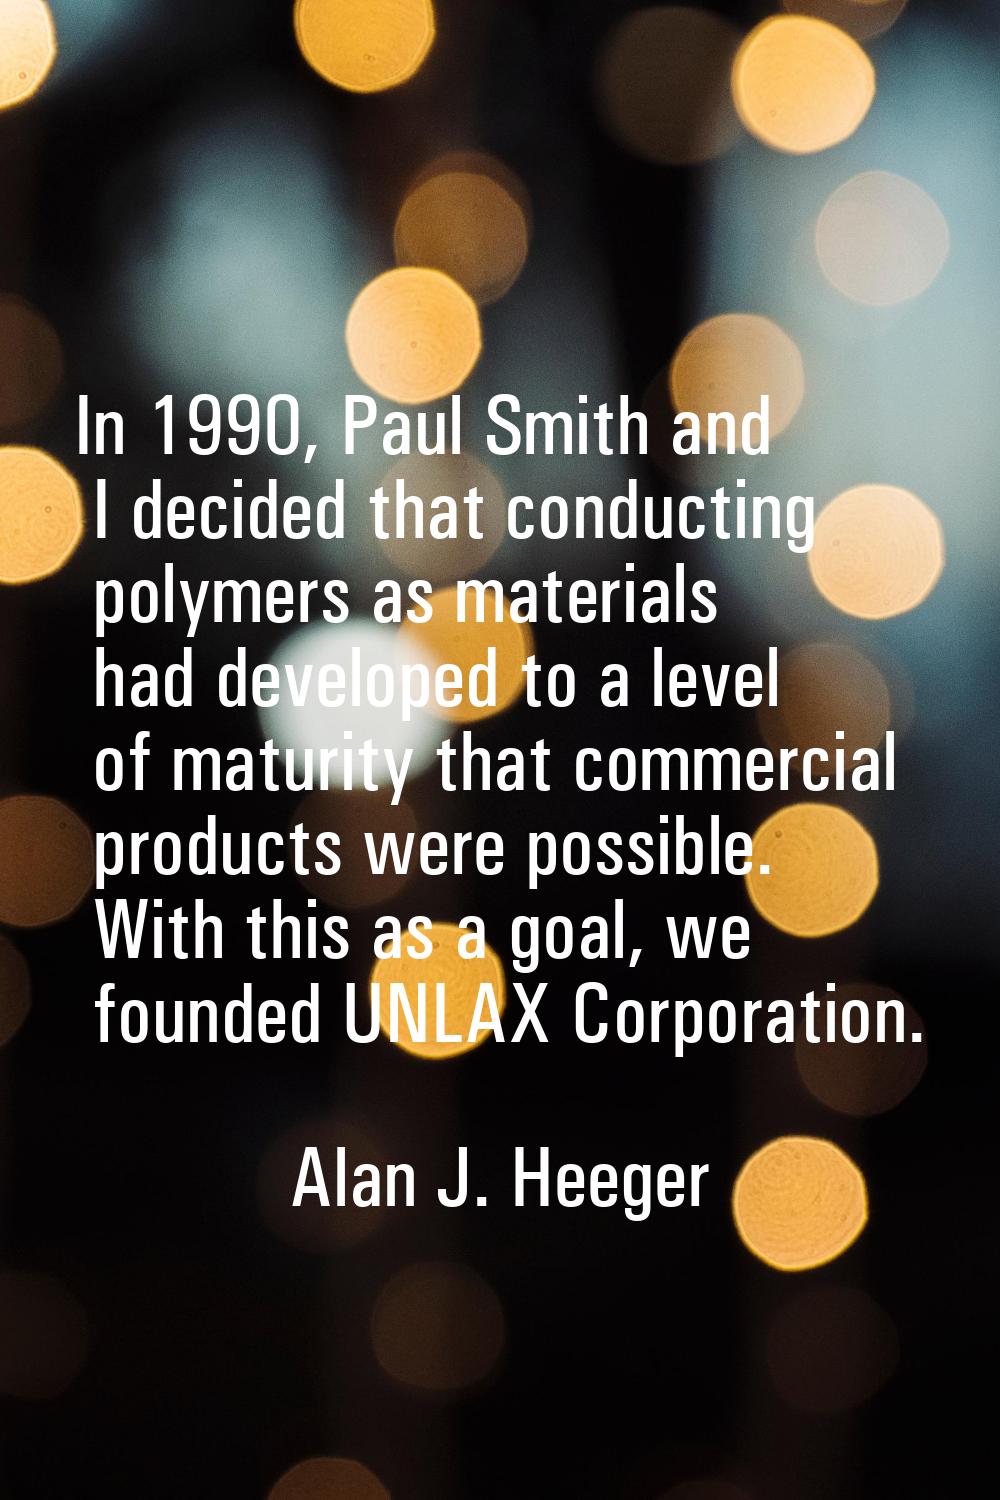 In 1990, Paul Smith and I decided that conducting polymers as materials had developed to a level of